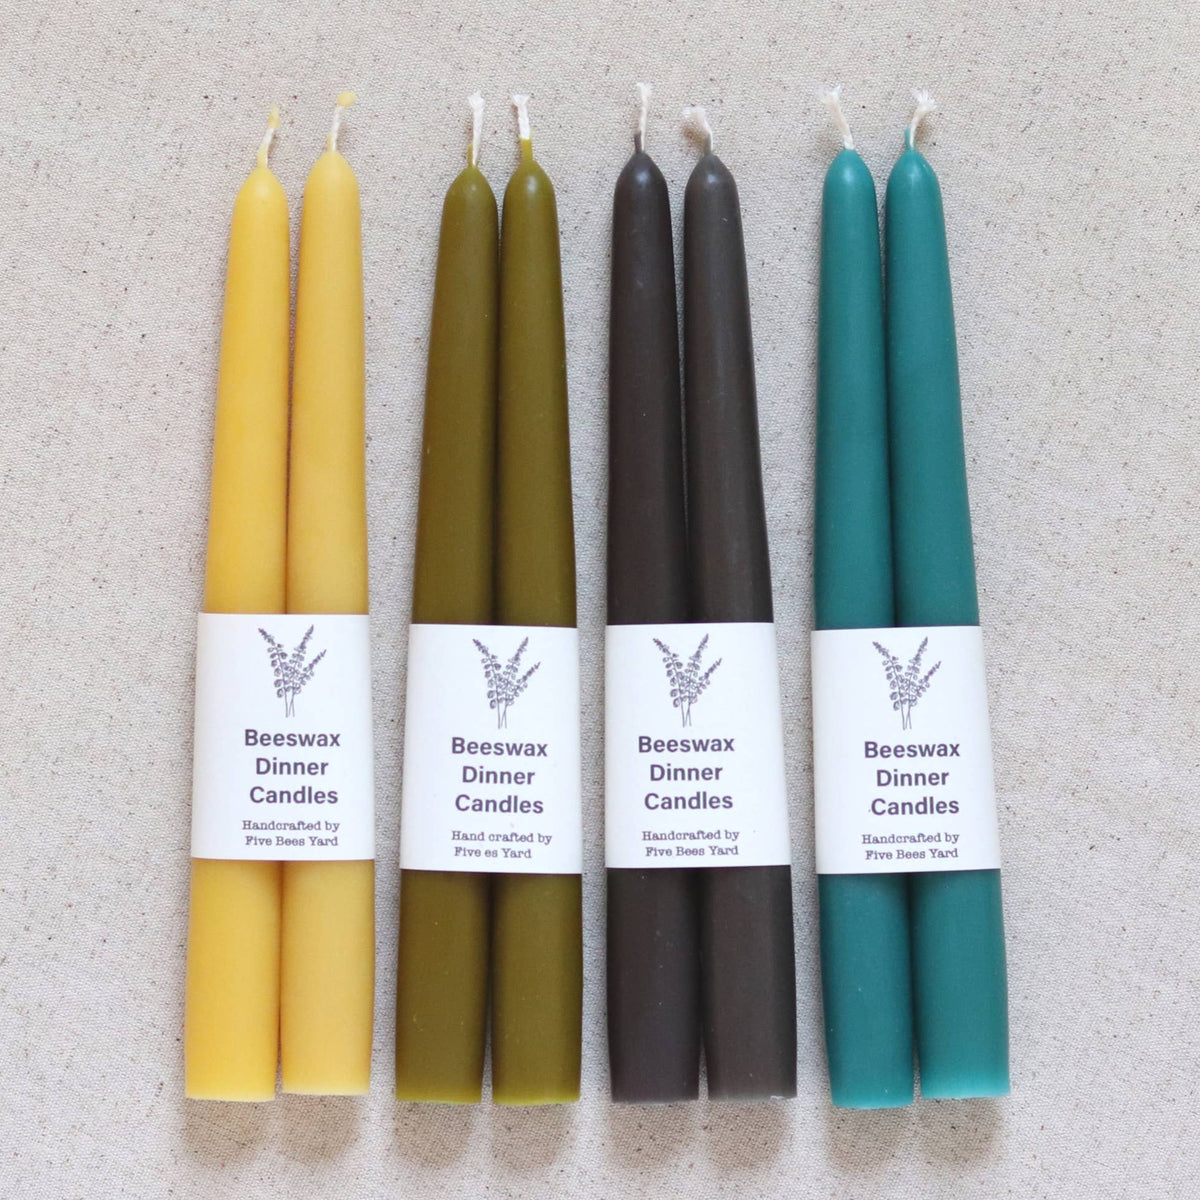 Five Bees Yard - Large Handmade Beeswax Dinner Candles | Taper | Non Dripping